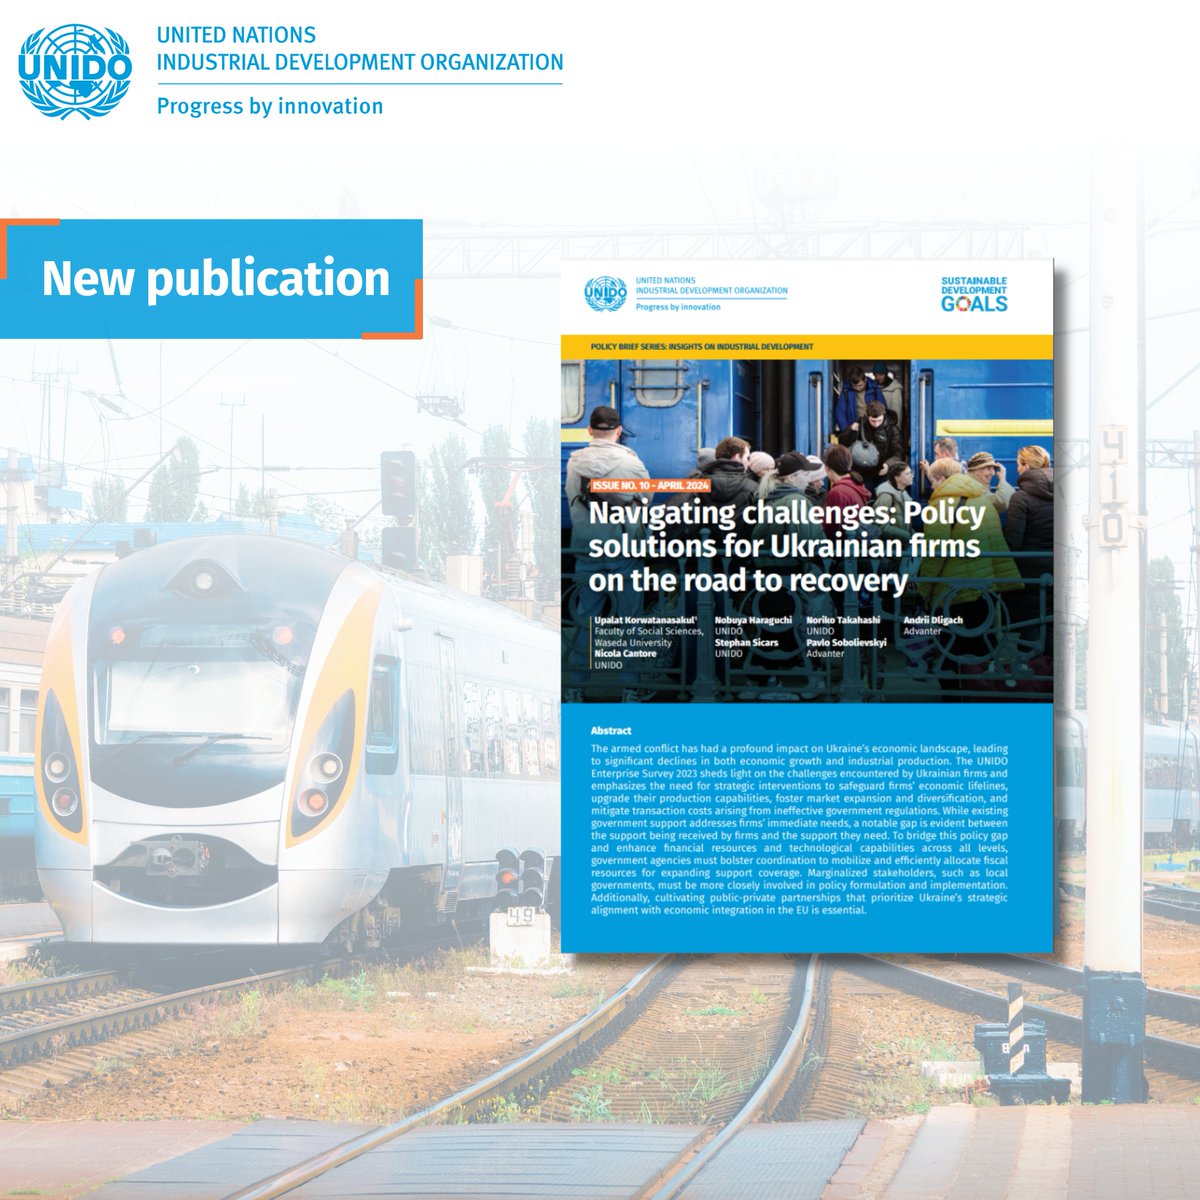 Policy #solutions for #Ukraine's economic growth: highlighting challenges faced by Ukrainian firms in the wake of armed conflict & the need for strategic interventions ⏩ bridge policy gaps, enhance support coverage & foster public-private partnerships. 👉unido.org/publications/p…